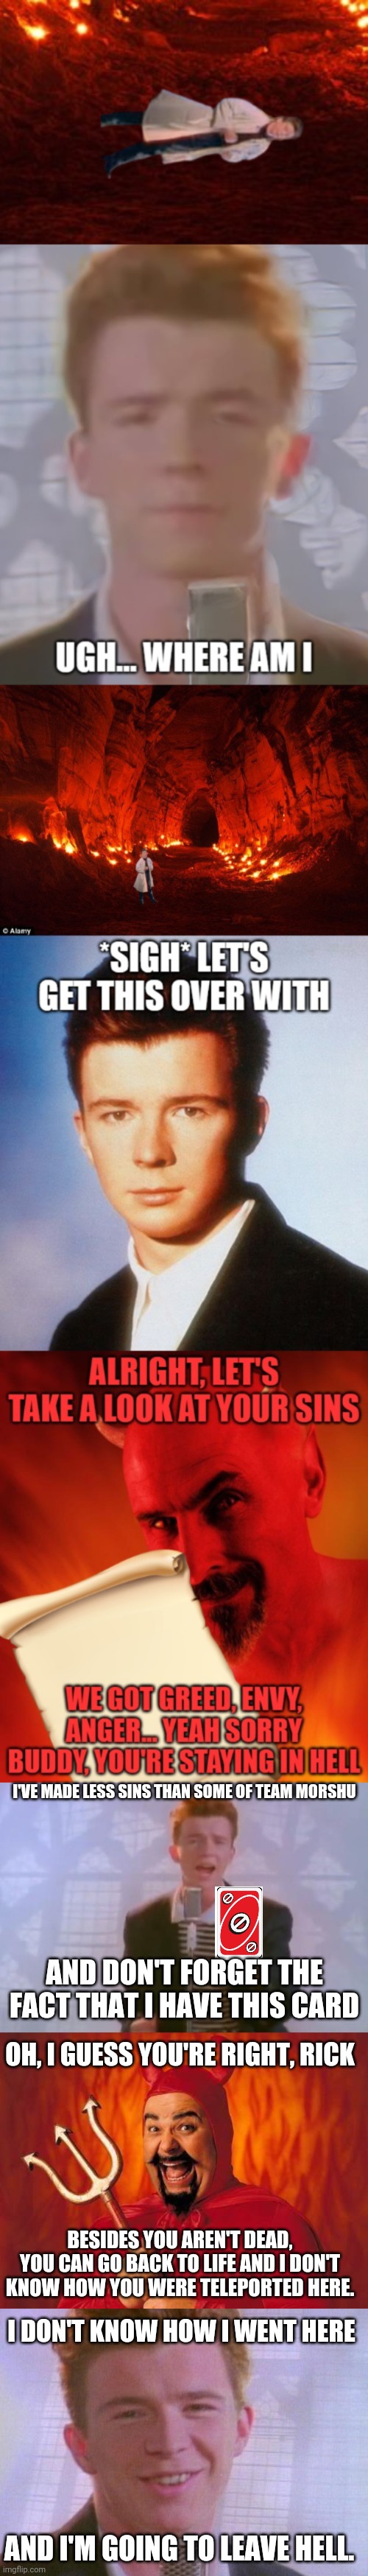 Rick Astley went to hell even though he didn't die. And if he did, I think he wouldn't. | I'VE MADE LESS SINS THAN SOME OF TEAM MORSHU; AND DON'T FORGET THE FACT THAT I HAVE THIS CARD; OH, I GUESS YOU'RE RIGHT, RICK; BESIDES YOU AREN'T DEAD, YOU CAN GO BACK TO LIFE AND I DON'T KNOW HOW YOU WERE TELEPORTED HERE. I DON'T KNOW HOW I WENT HERE; AND I'M GOING TO LEAVE HELL. | image tagged in rick astley,funny satan | made w/ Imgflip meme maker